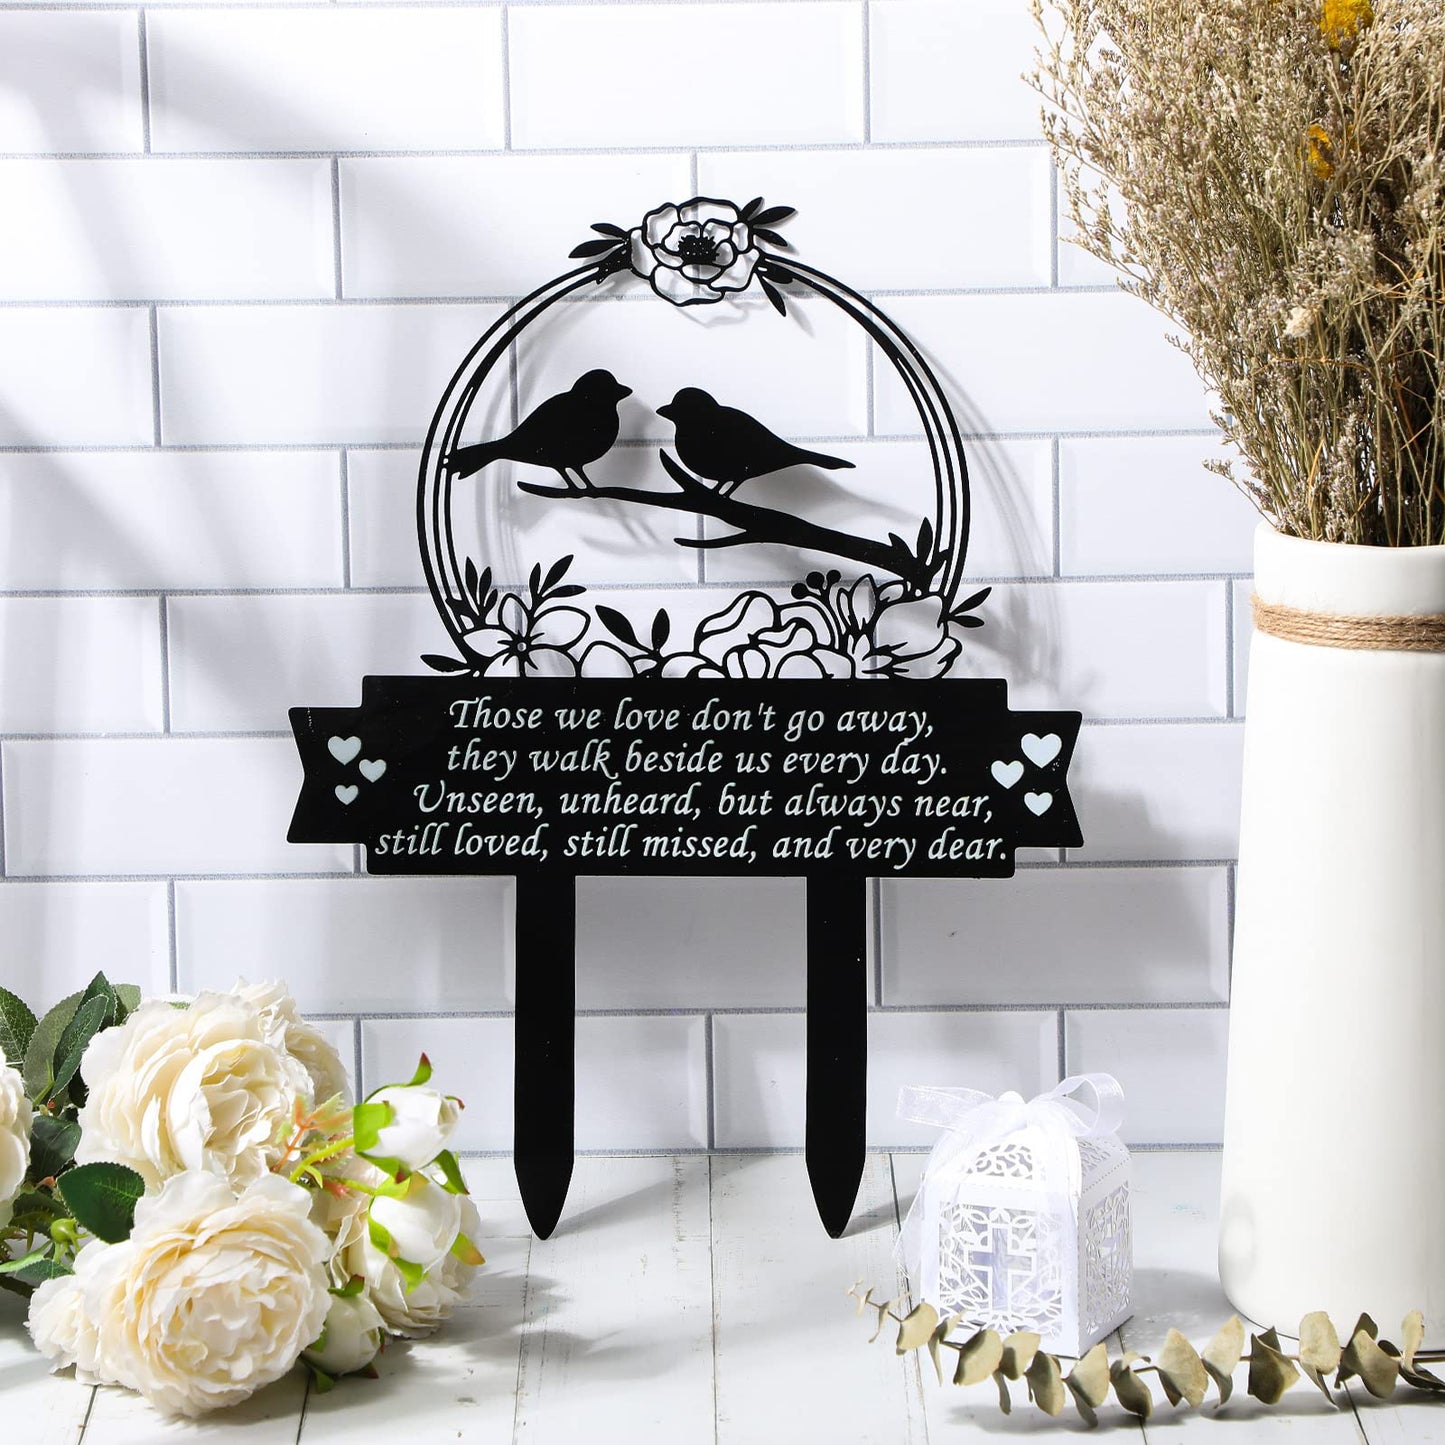 Geelin Memorial Grave Markers 13.78 x 11.4 Inch Metal Cemetery Decorations for Grave Sympathy Bird Memorial Plaques for Outdoors Those We Love Don't Go Away Grave Plaque Stake for Outdoors Yard Garden